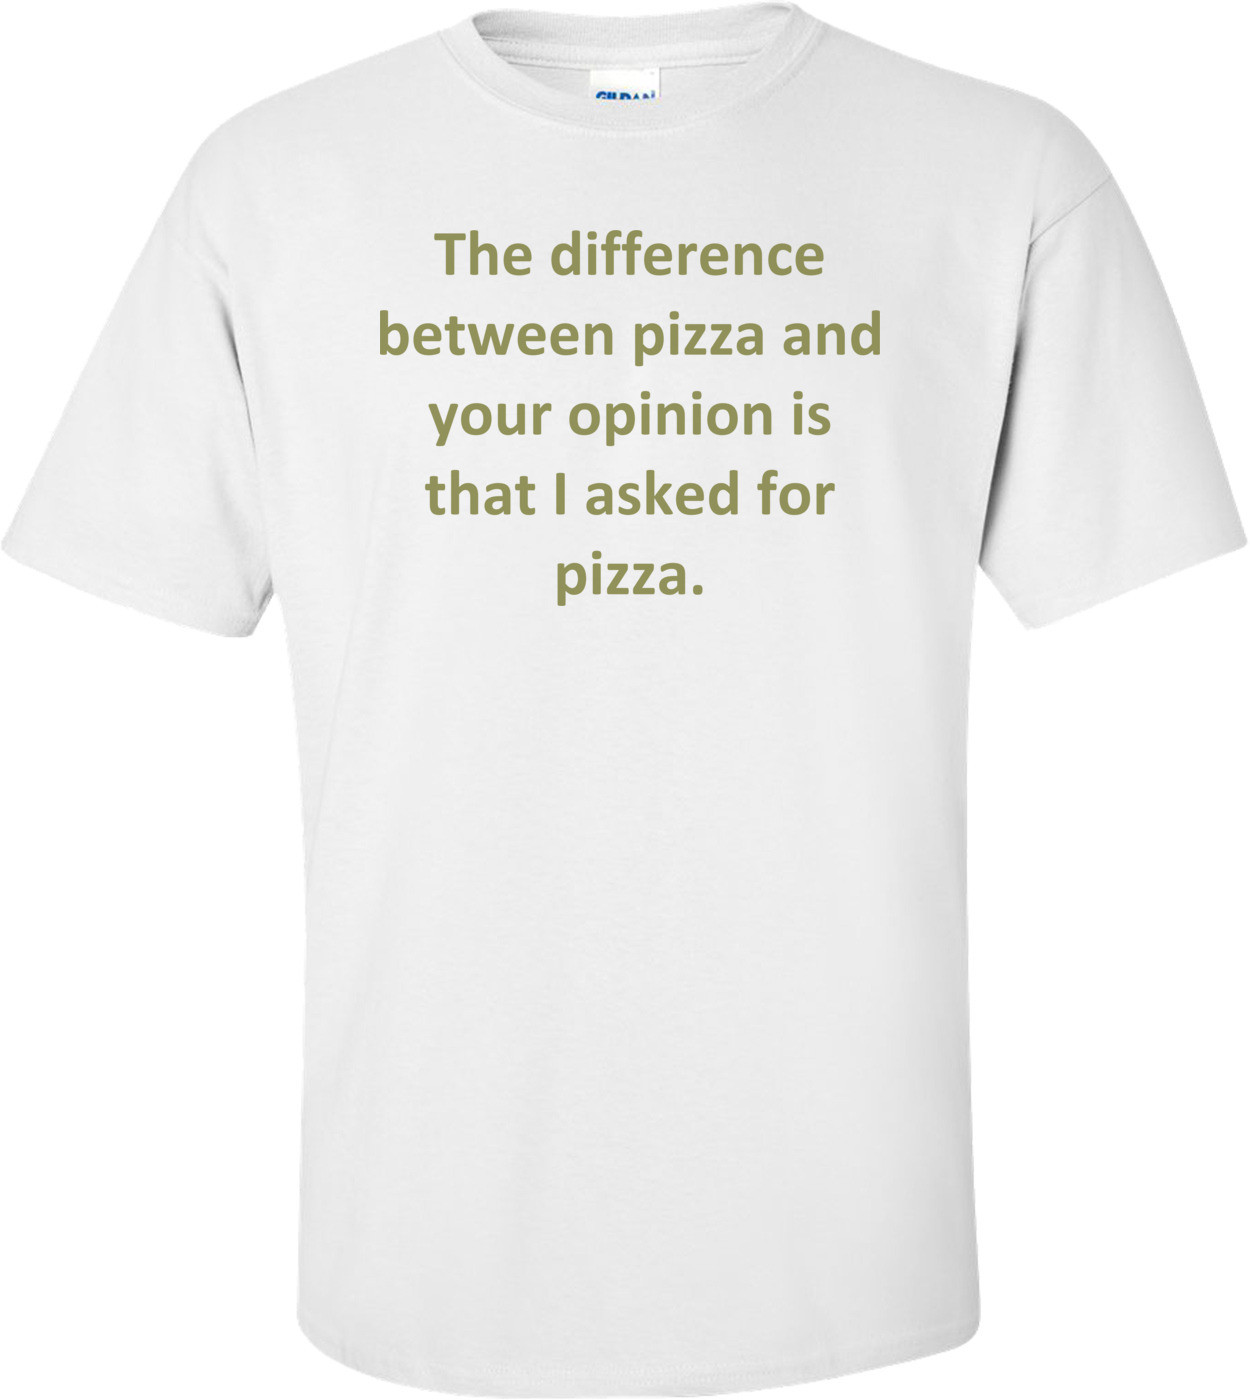 The difference between pizza and your opinion is that I asked for pizza. Shirt